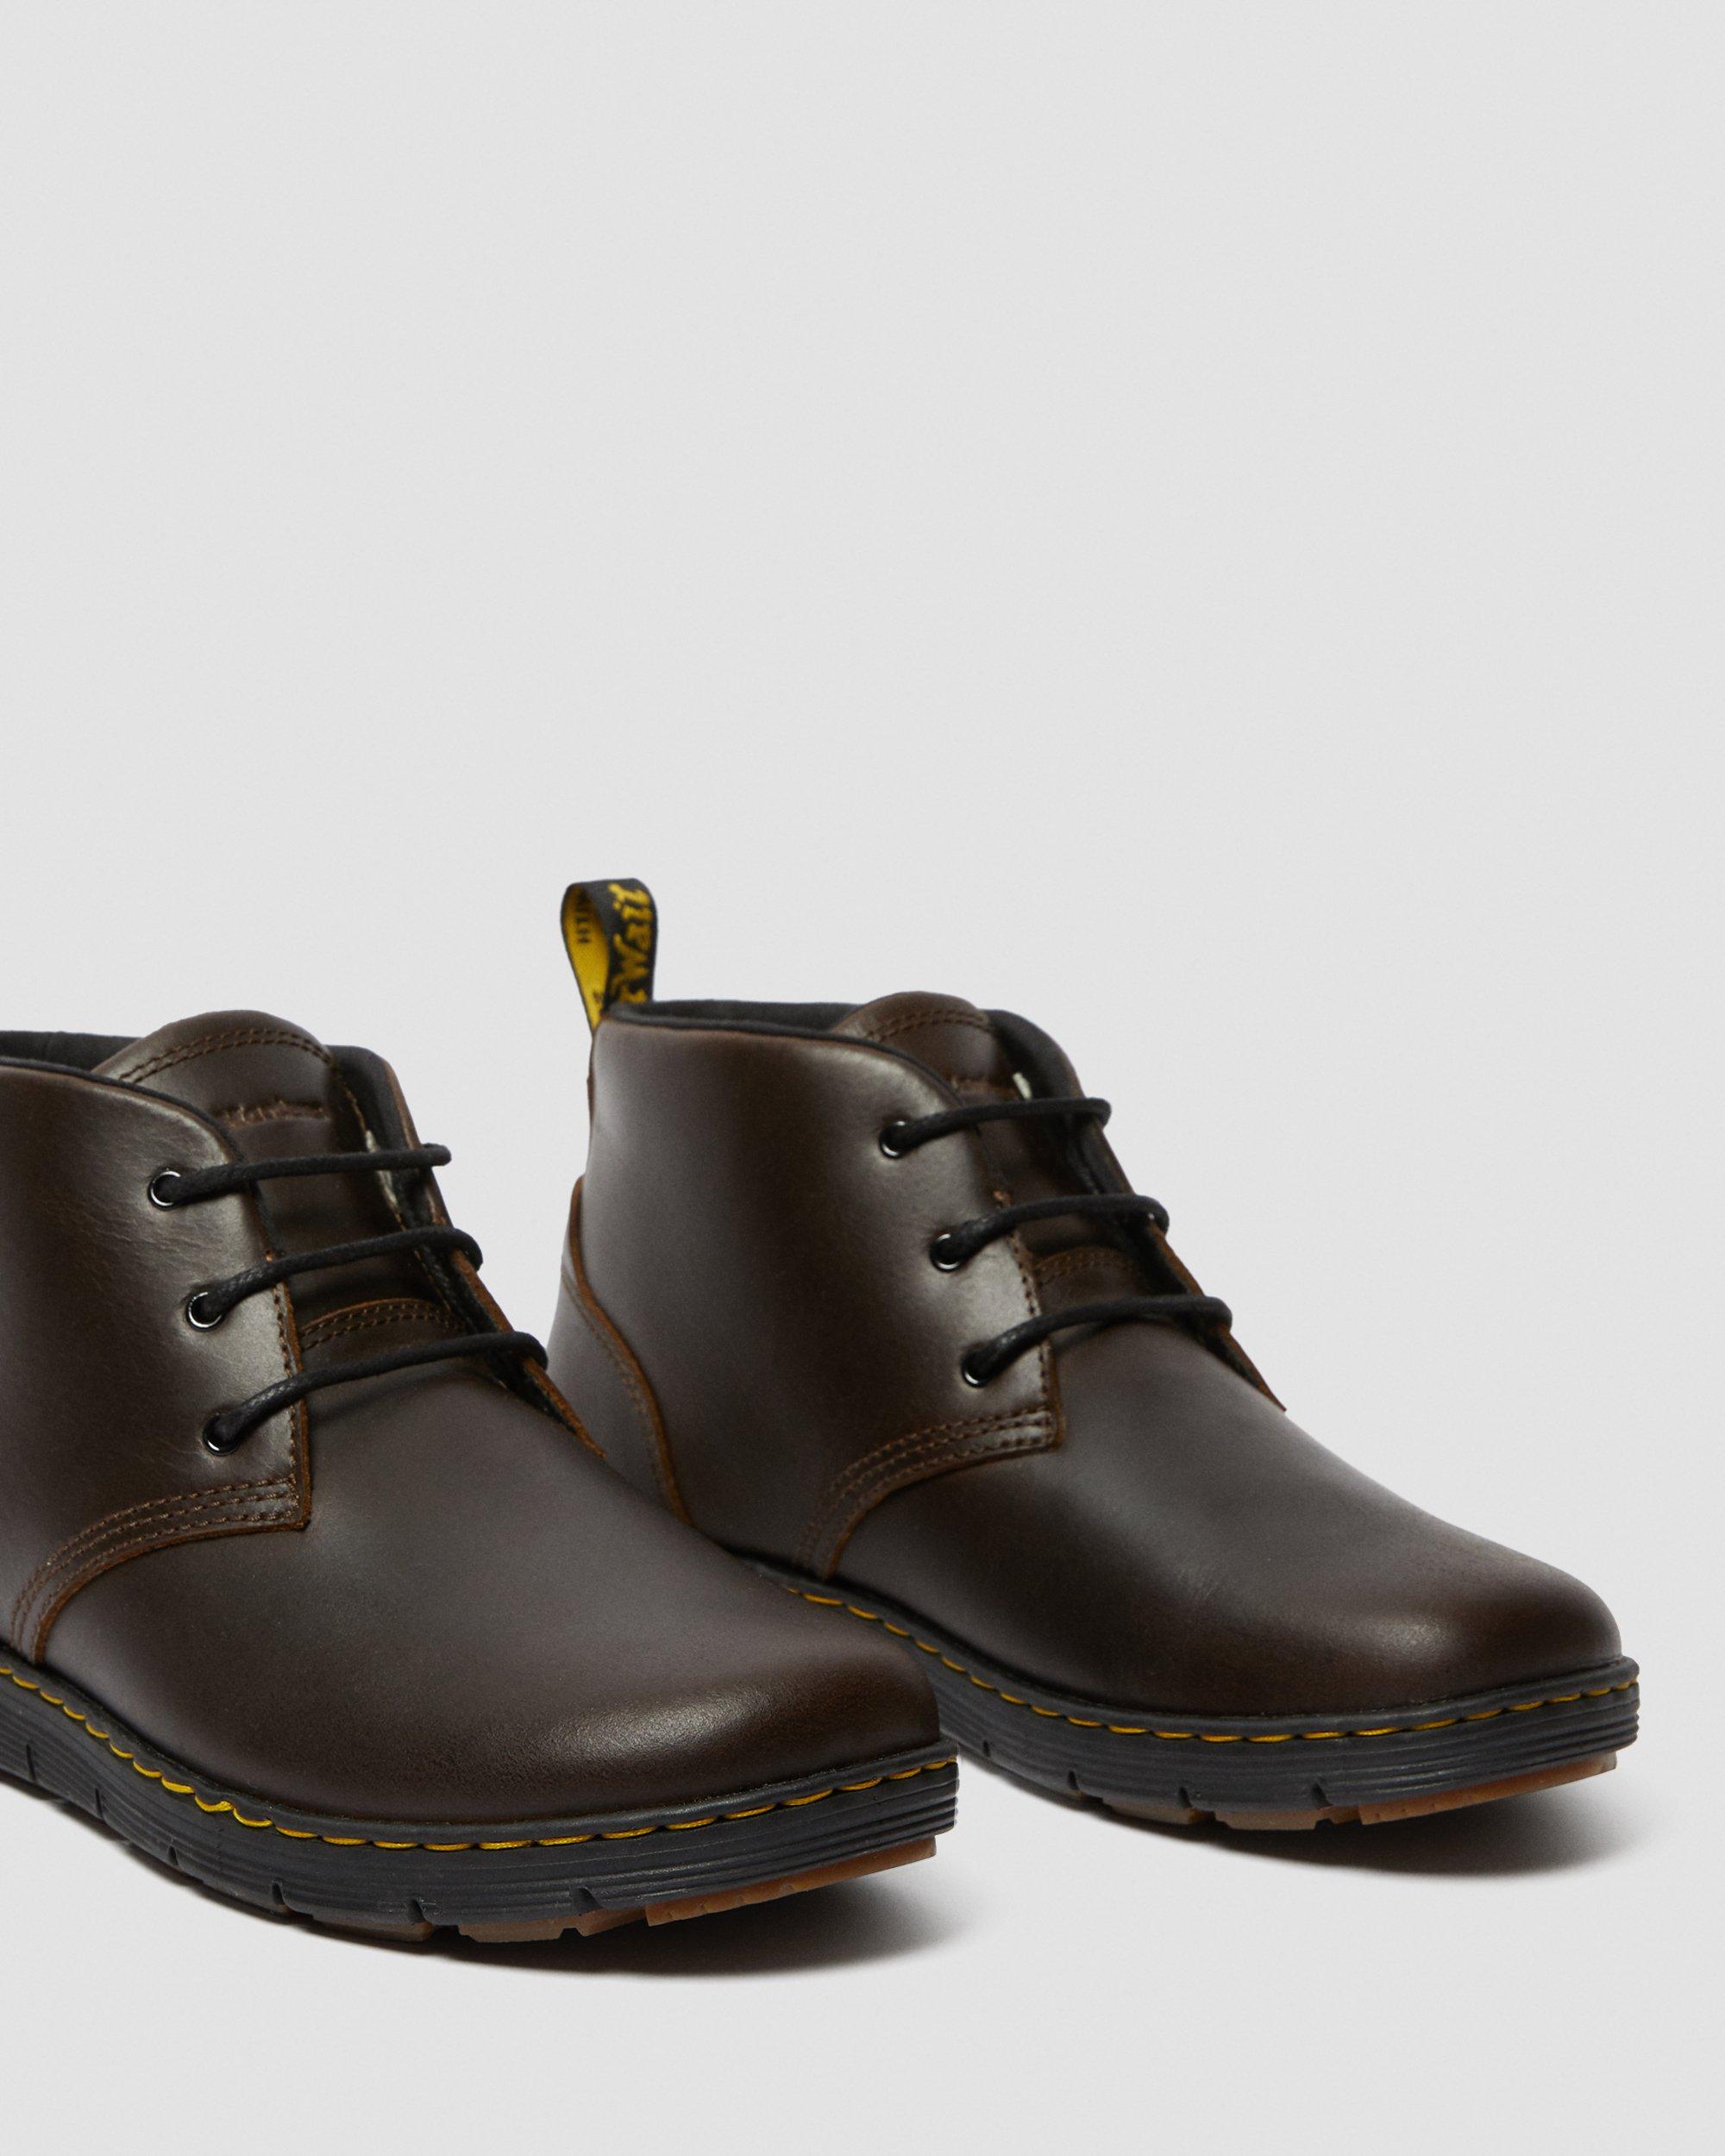 LEATHER CHUKKA BOOTS | Dr. Martens 